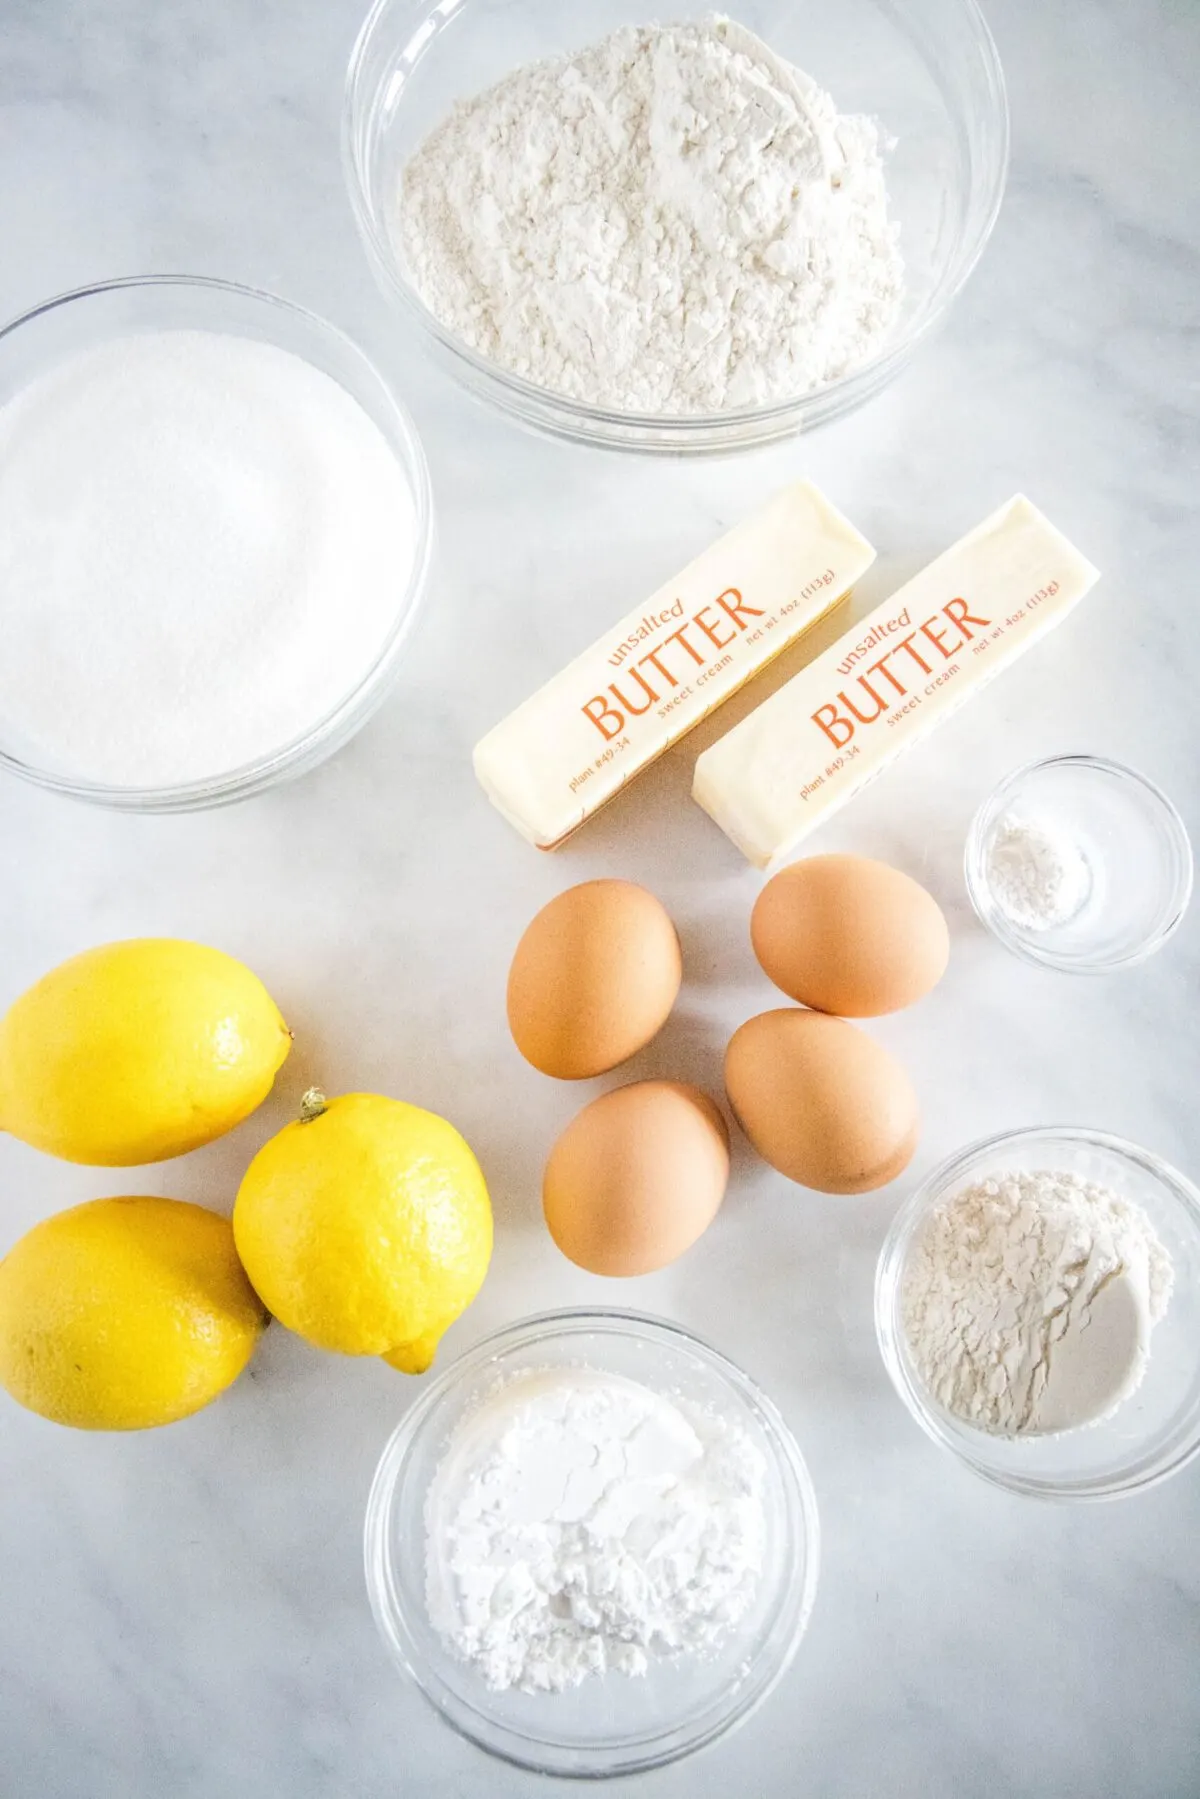 Overhead view of the ingredients needed for lemon bars: a big bowl of flour, a little bowl of flower, a bowl of sugar, a bowl of powdered sugar, a bowl of baking powder, two sticks of butter, four eggs, and three lemons